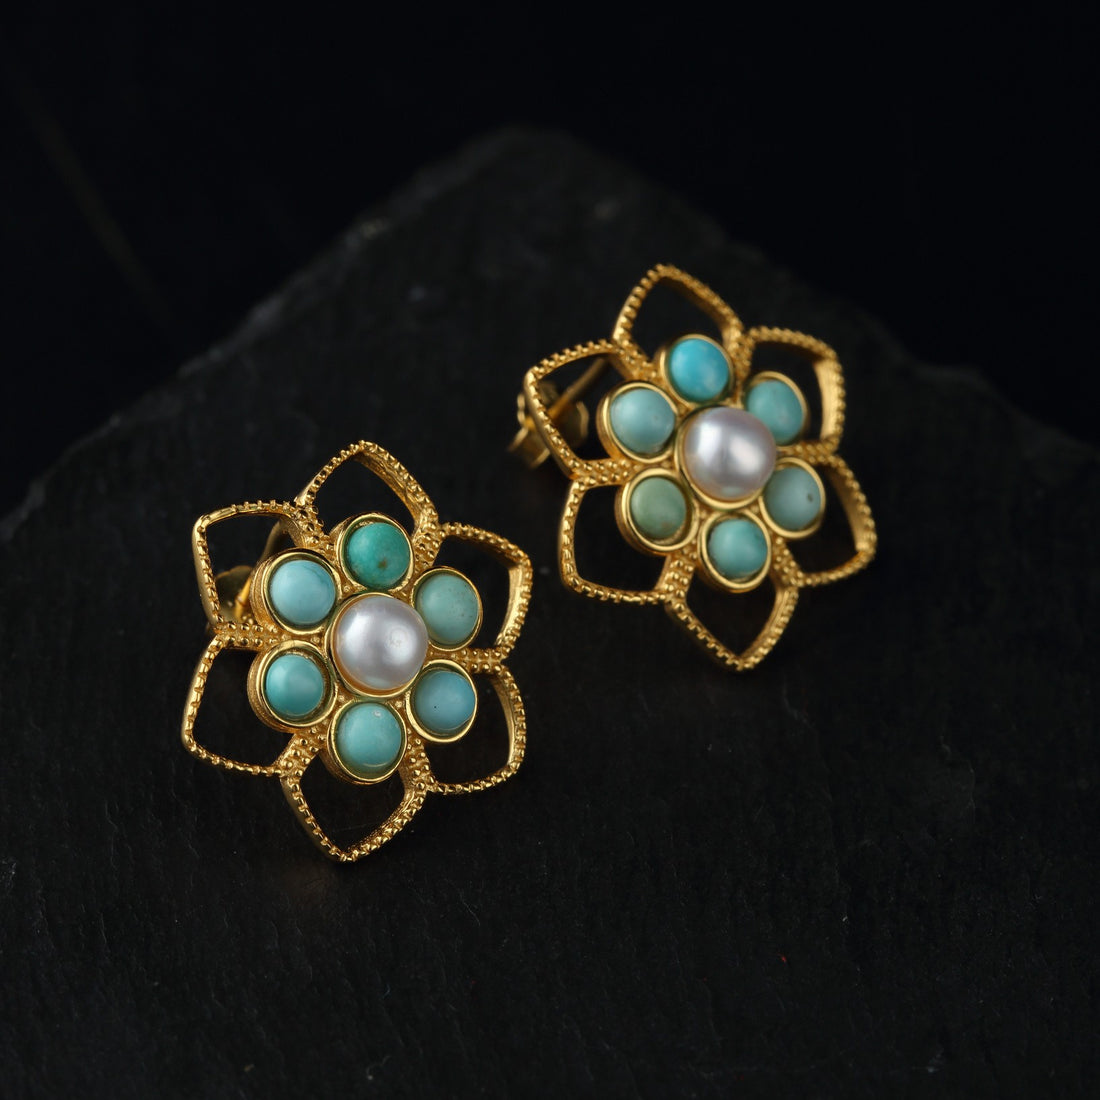 Chinese Traditional Hairpin & Earrings with Turquoise